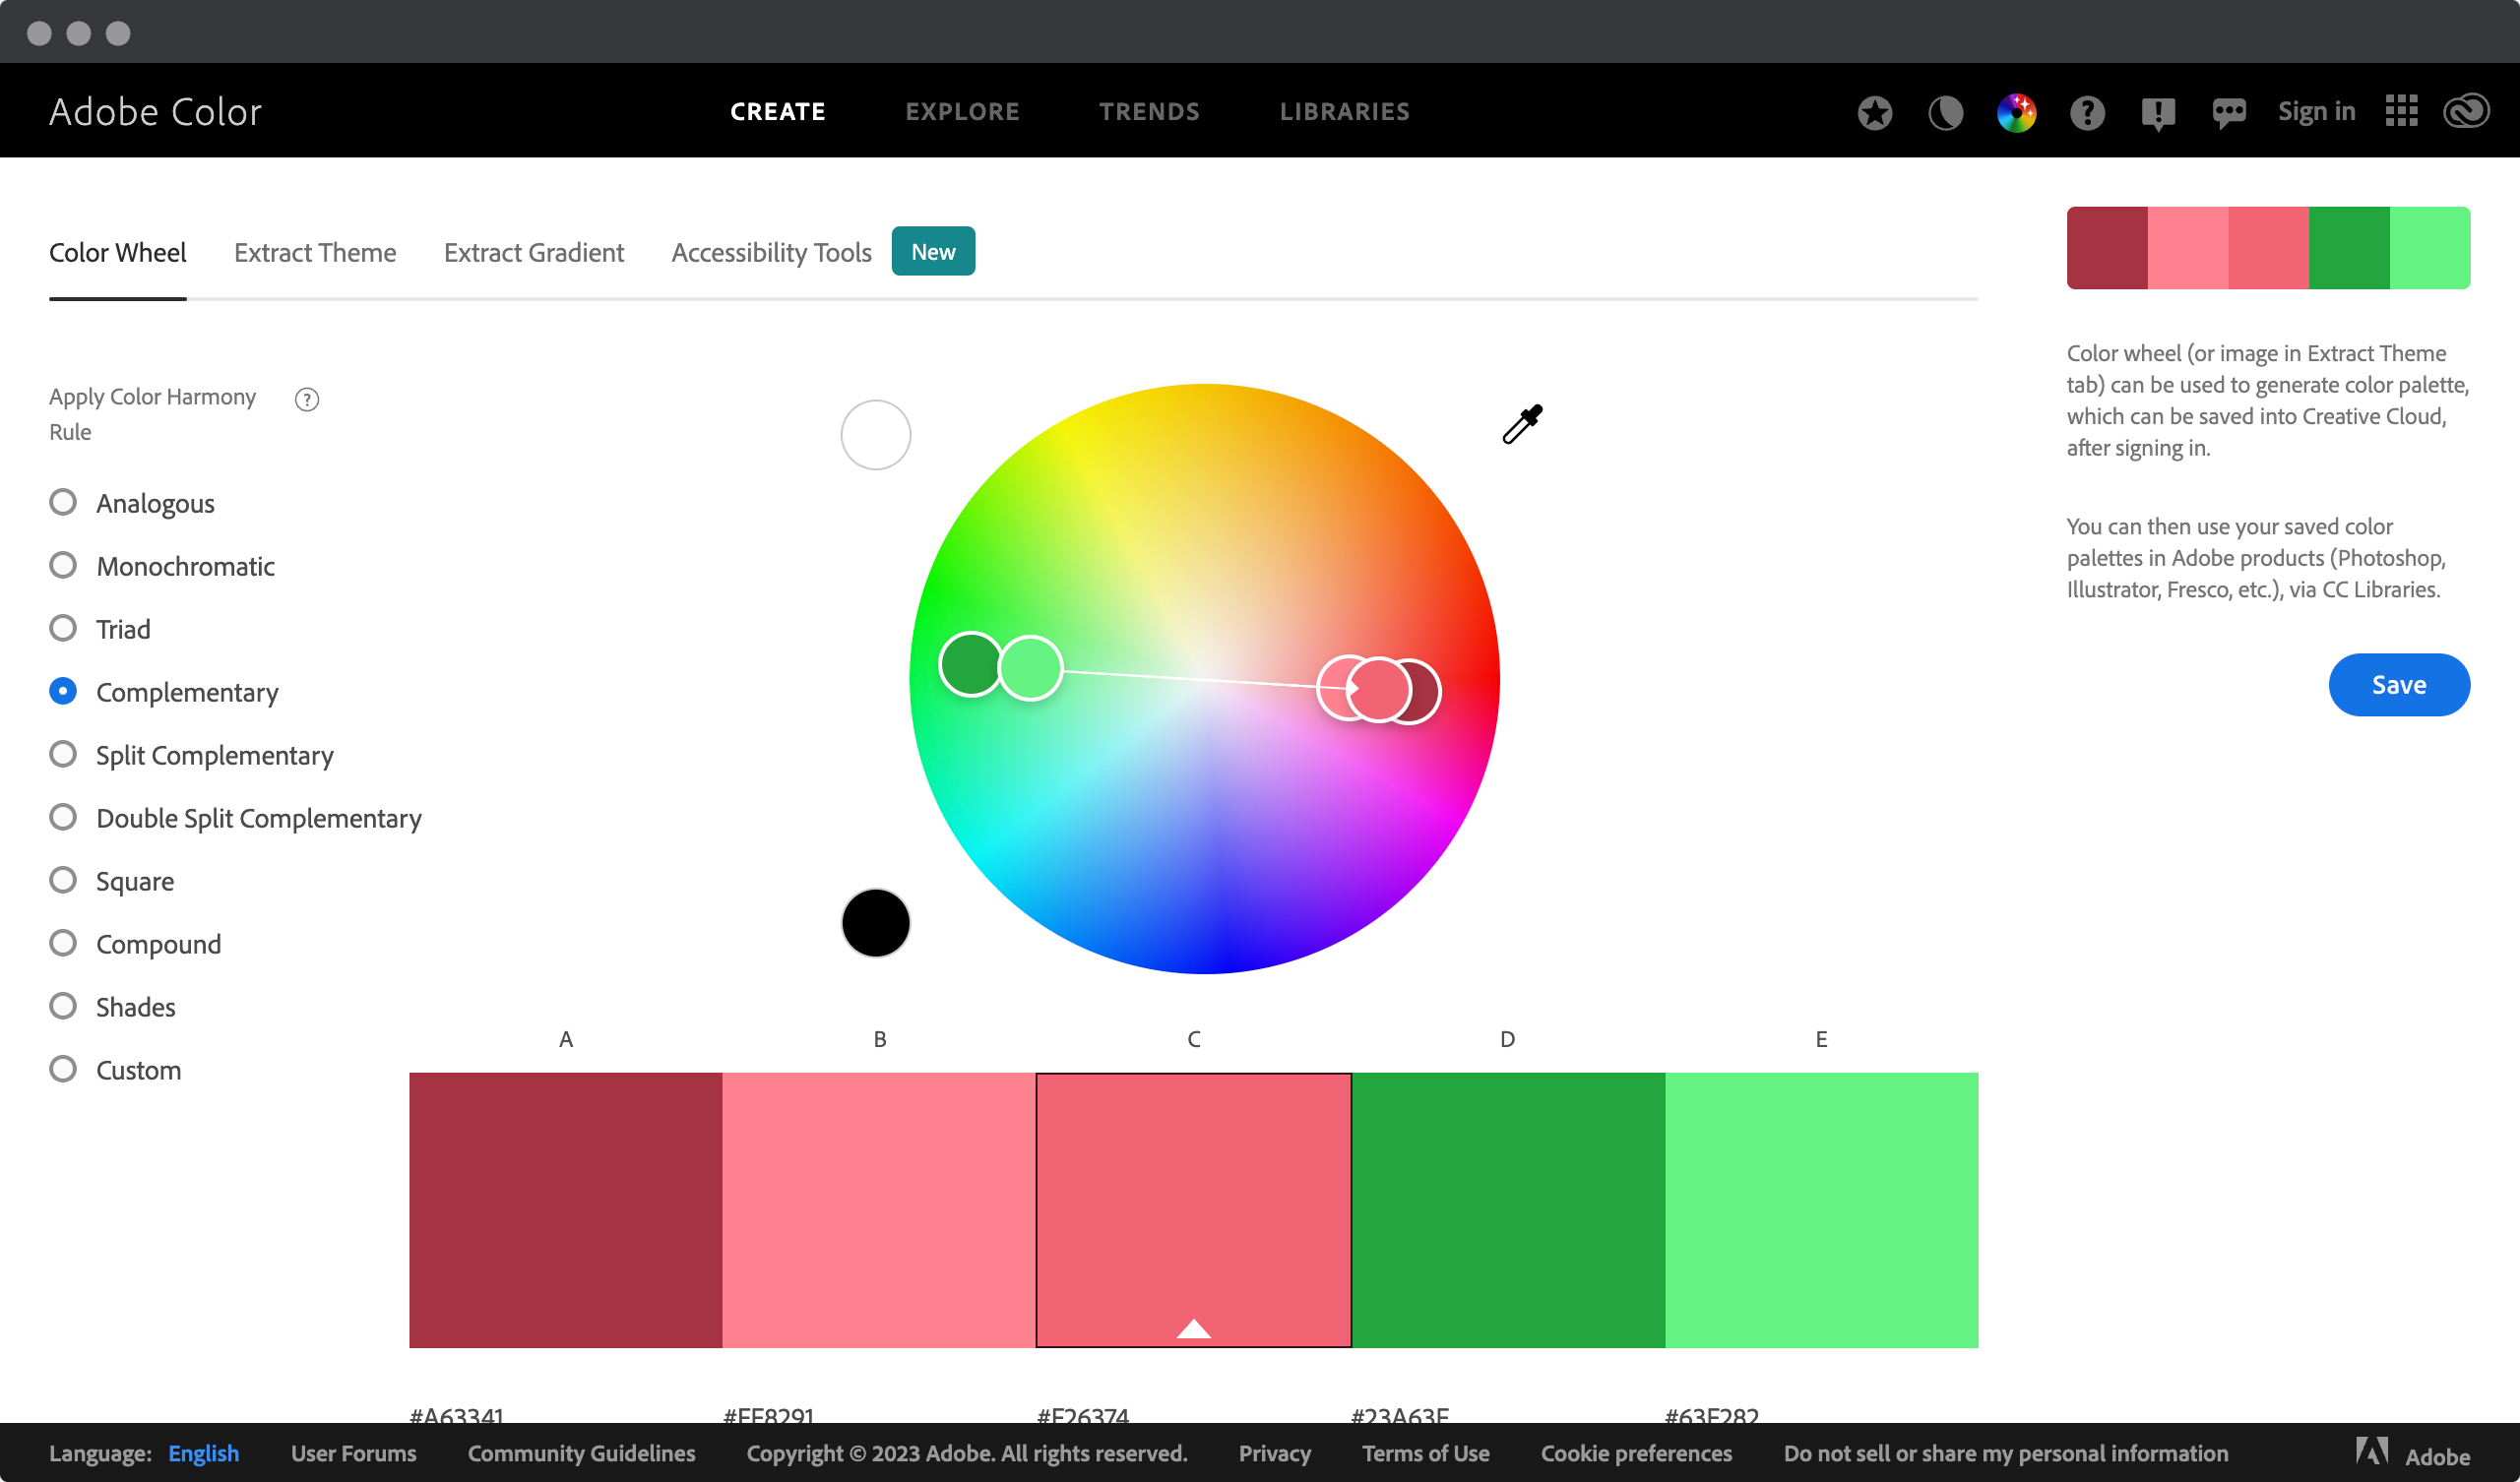 Screenshot of a Web page showing the complementary colors in Adobe Color Wheel tool